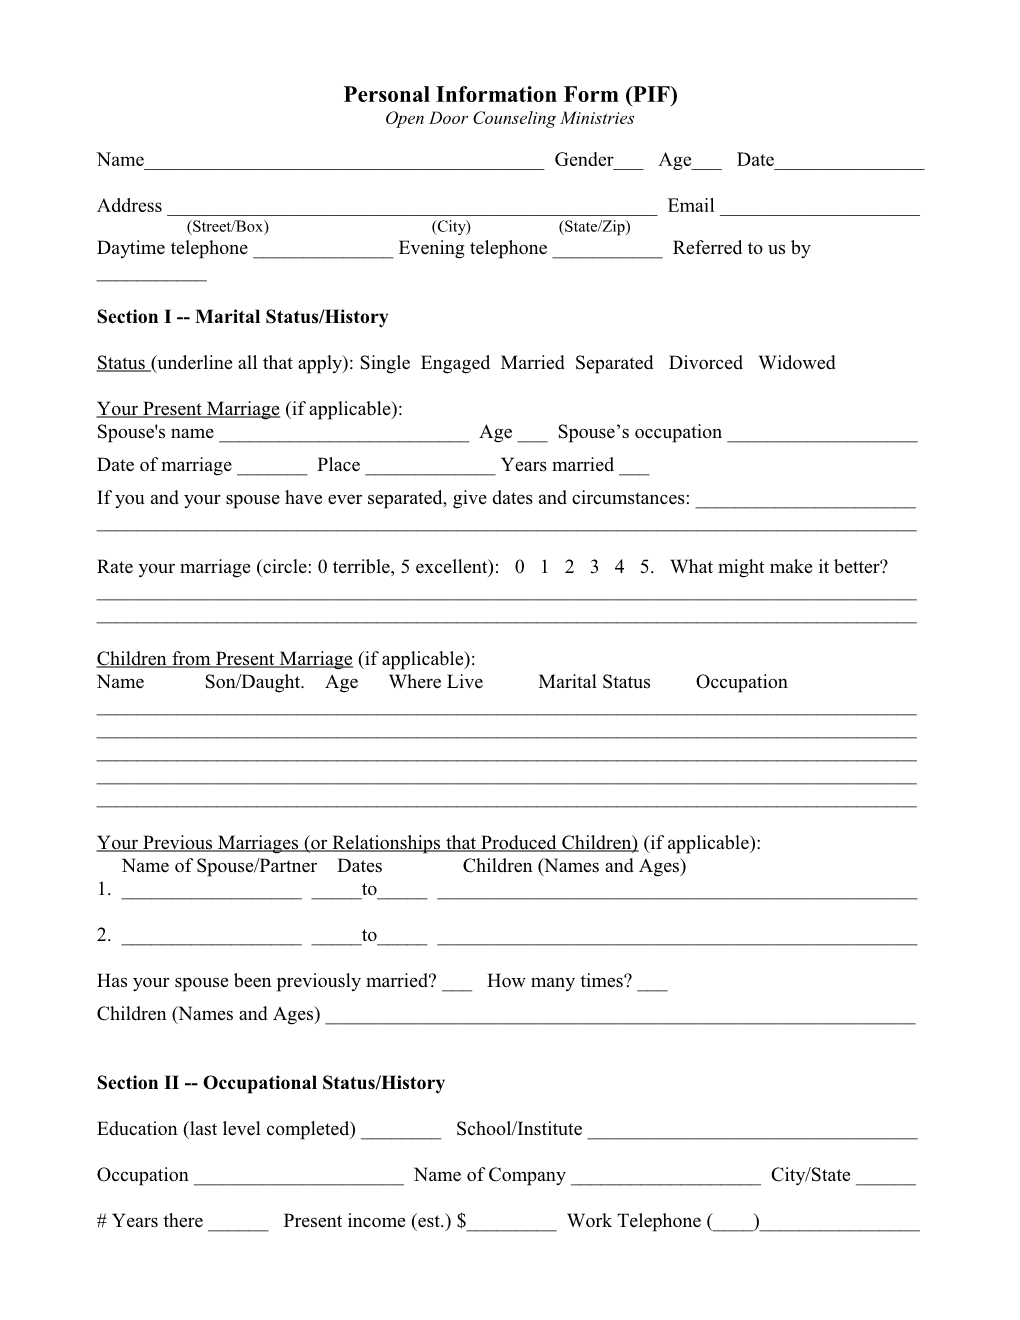 Personal Data Inventory (Pdi) Form